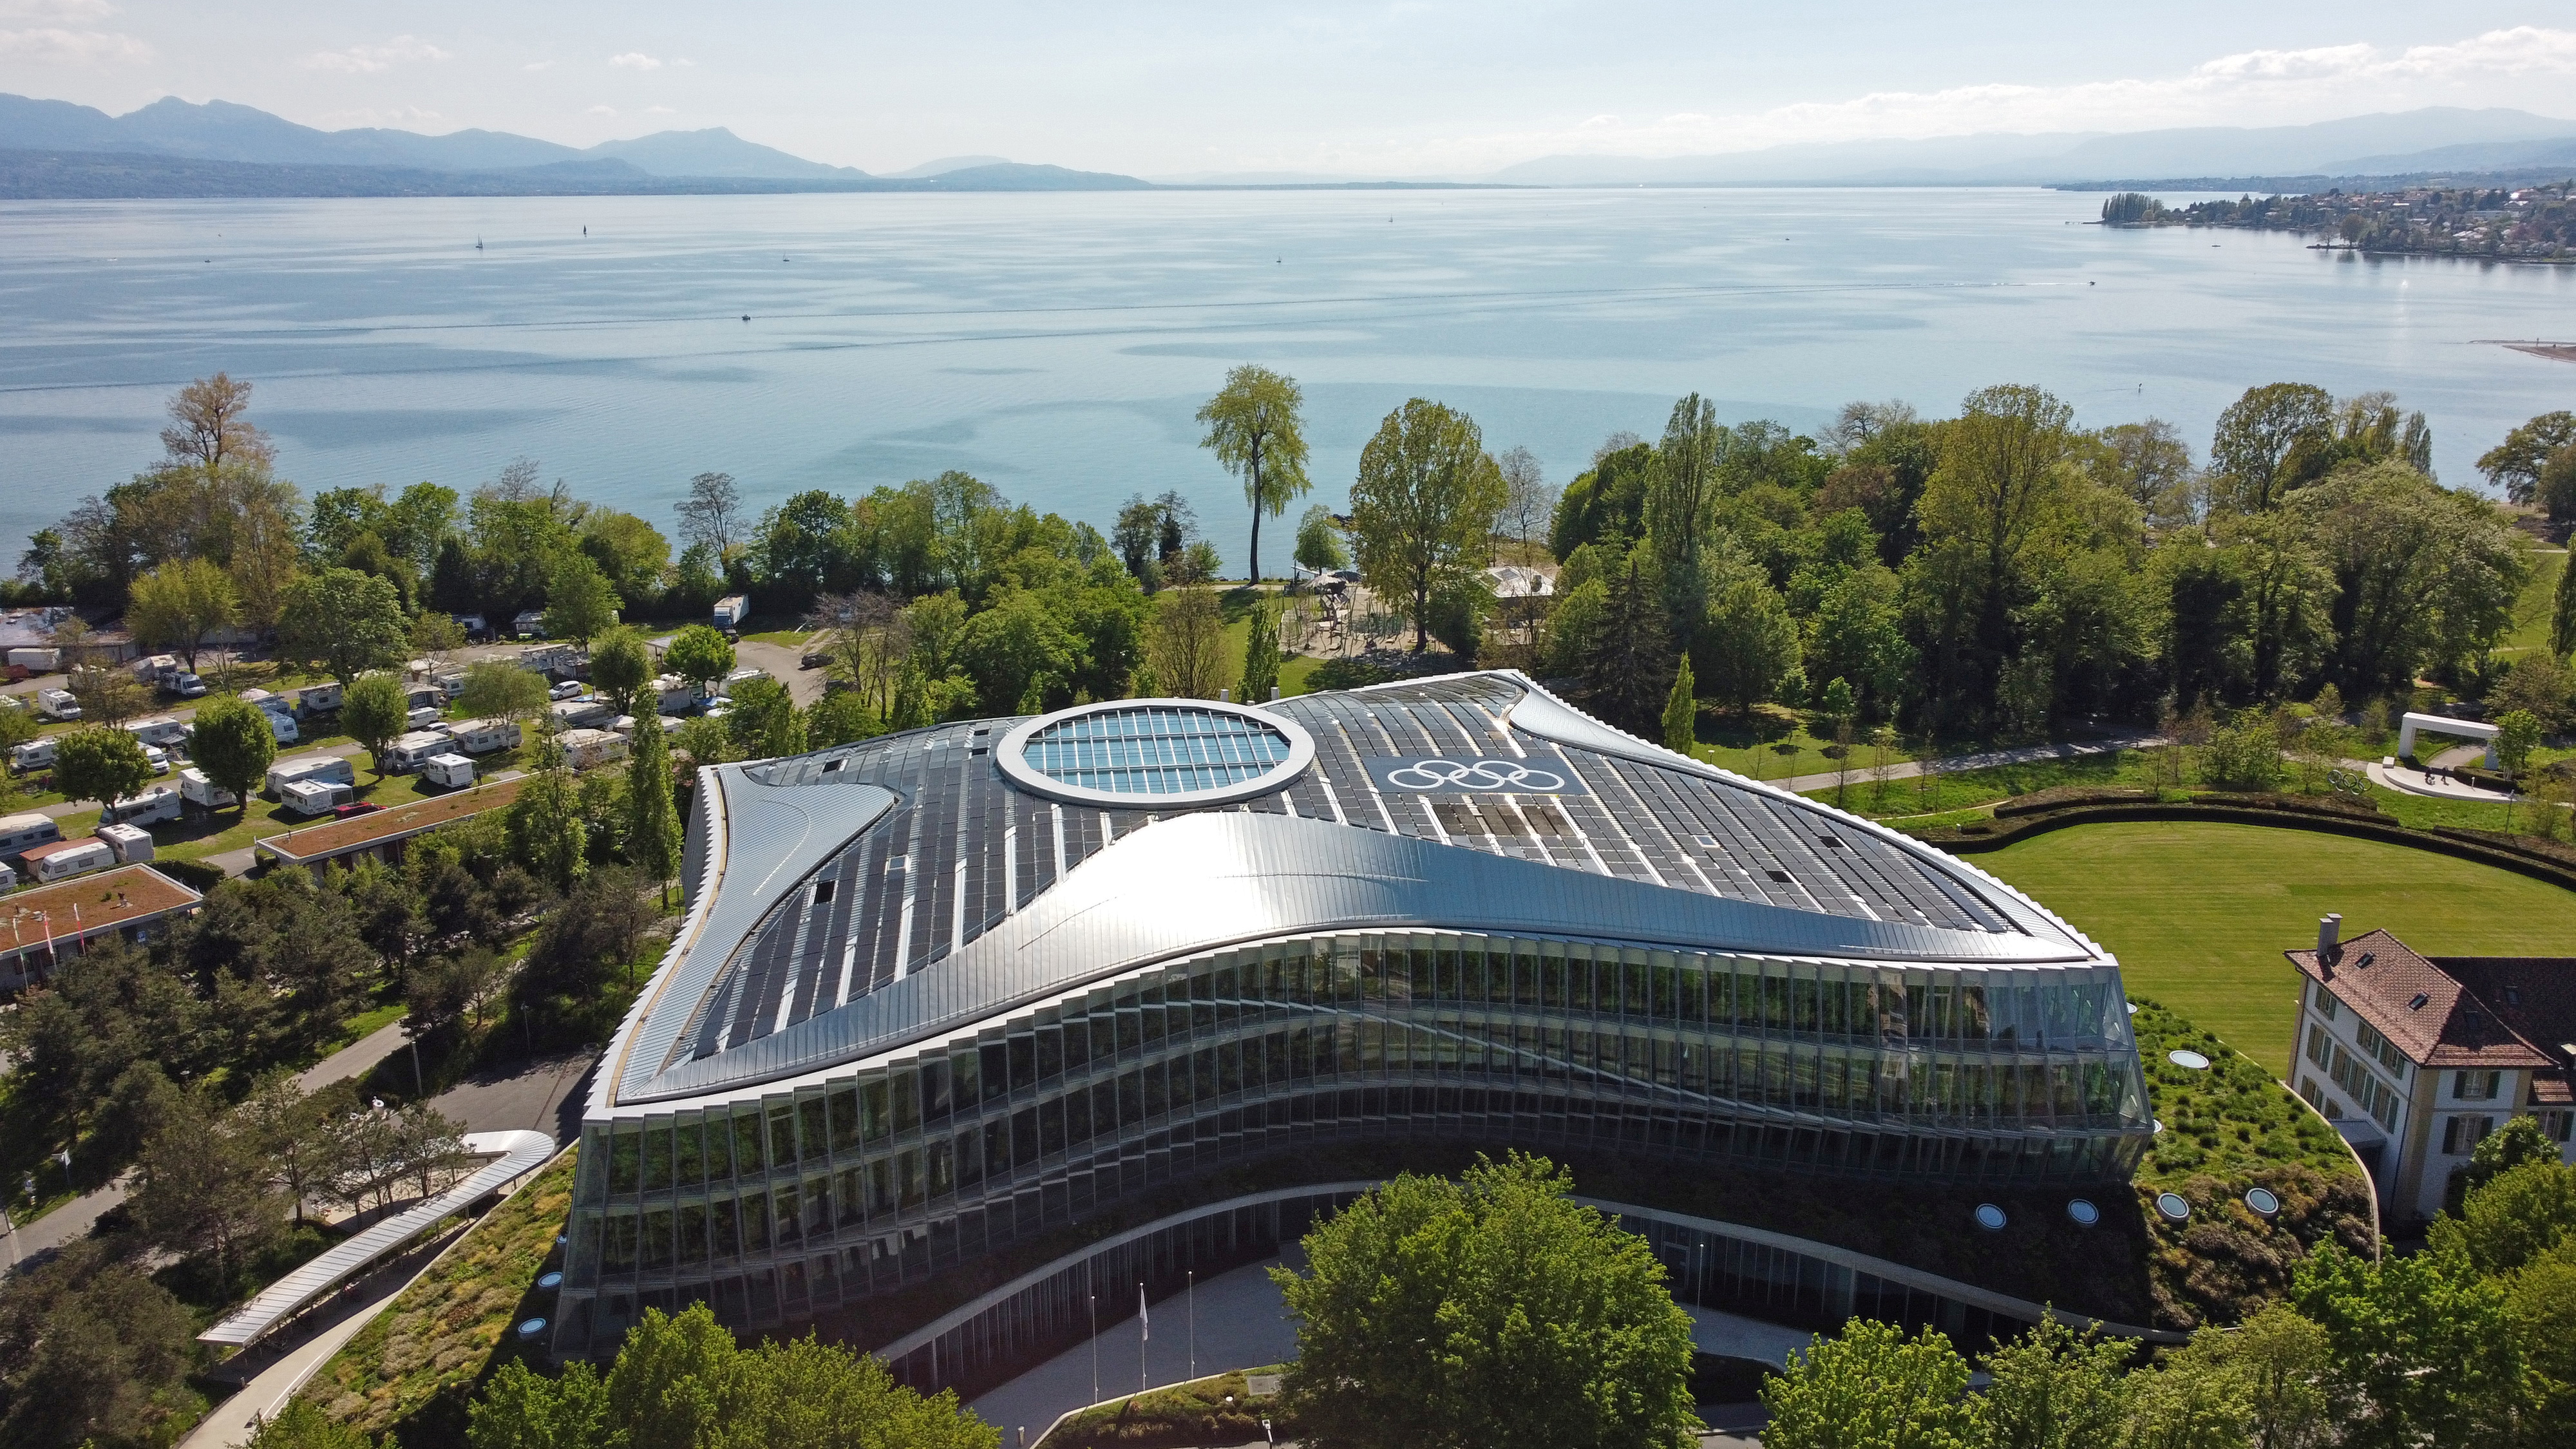 The Olympic rings are pictured among solar panels on top of the International Olympic Committee (IOC) headquarters in Lausanne, Switzerland, May 3, 2021. Picture taken with a drone. REUTERS/Denis Balibouse